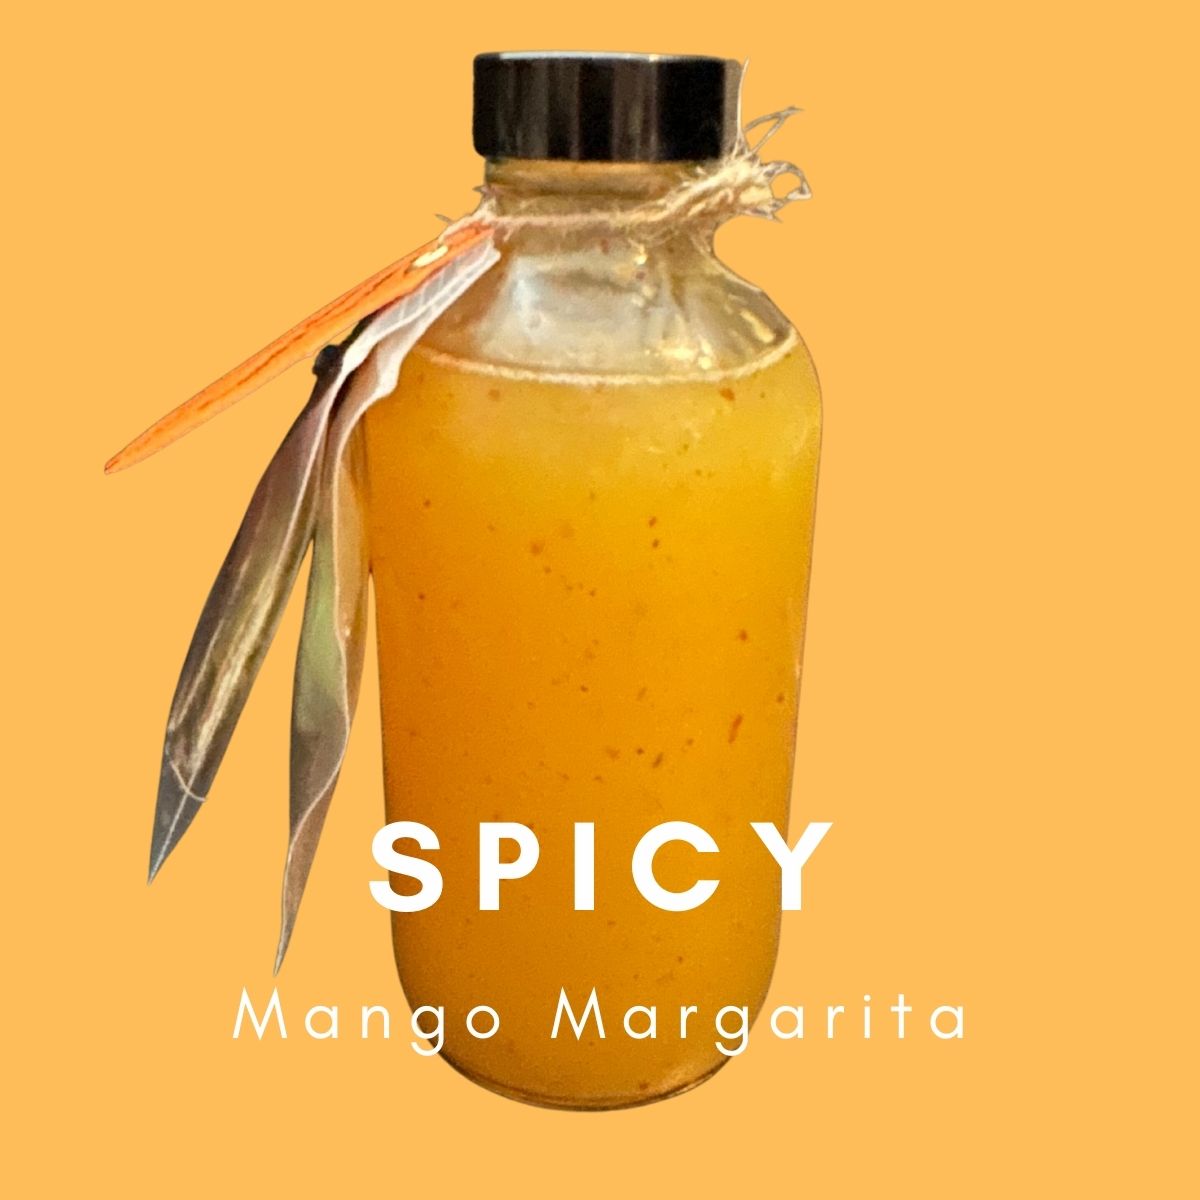 A bottle of Spicy Mango Margarita with an orange background. The bottle is sealed with a metal cap, decorated with a twine bow and a feather. The label reads "Spicy Mango Margarita" in bold white text, indicating it's crafted from top shelf spirits from the Super Bargain Shop's RTD Cocktail Gift Boxes.